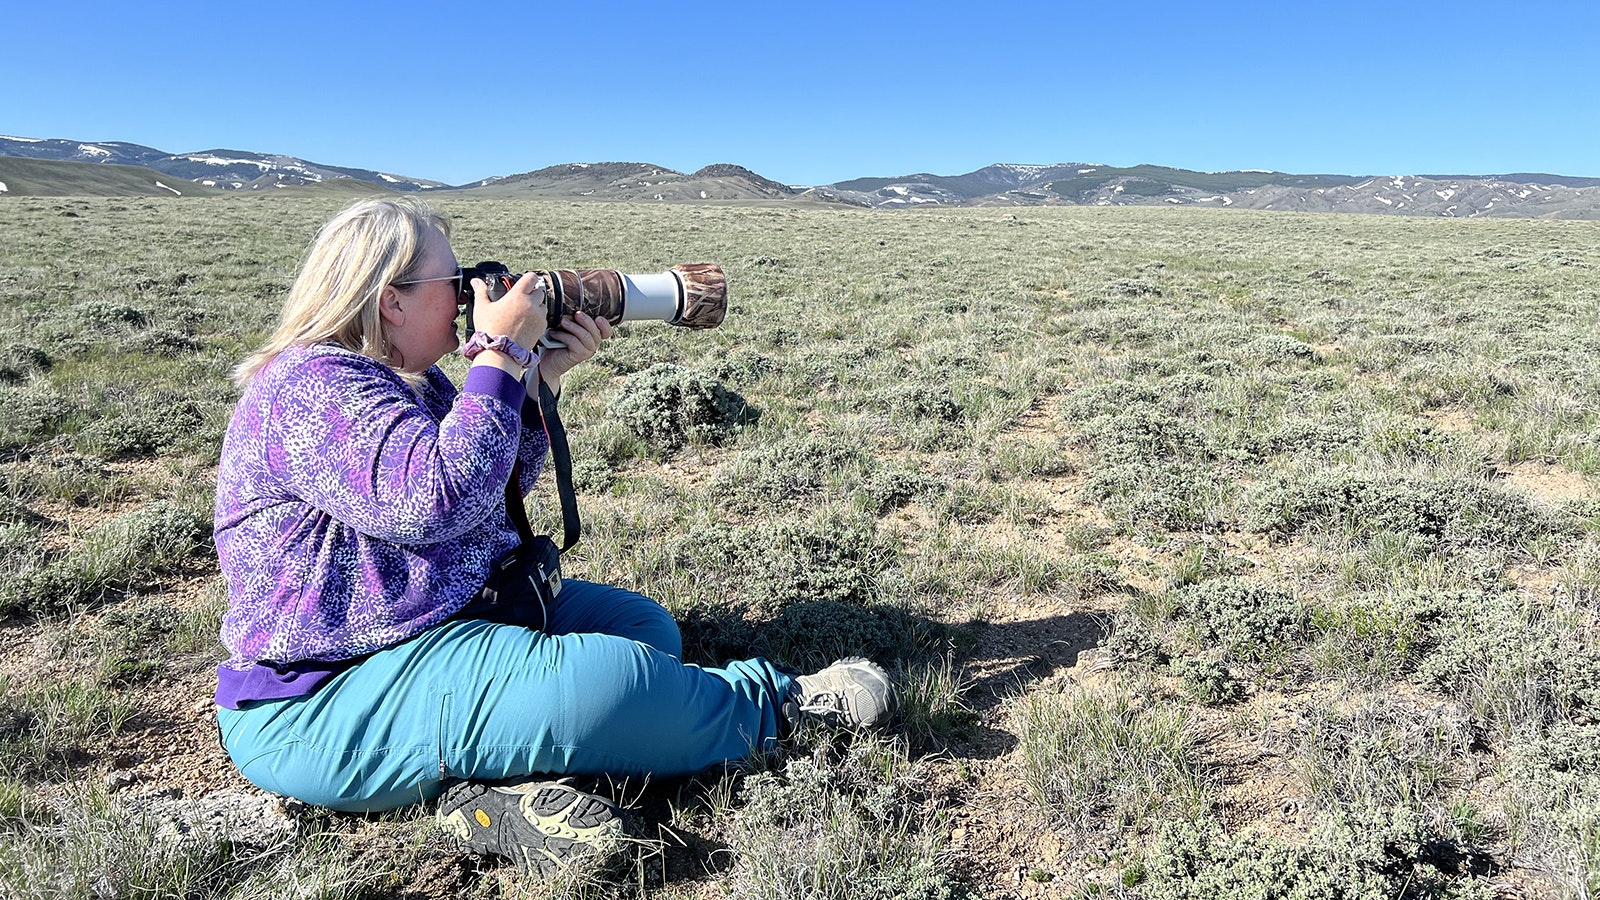 Wild Horse advocate Carol Walker frequently spends time on the open range in Wyoming, observing and photographing mustangs.